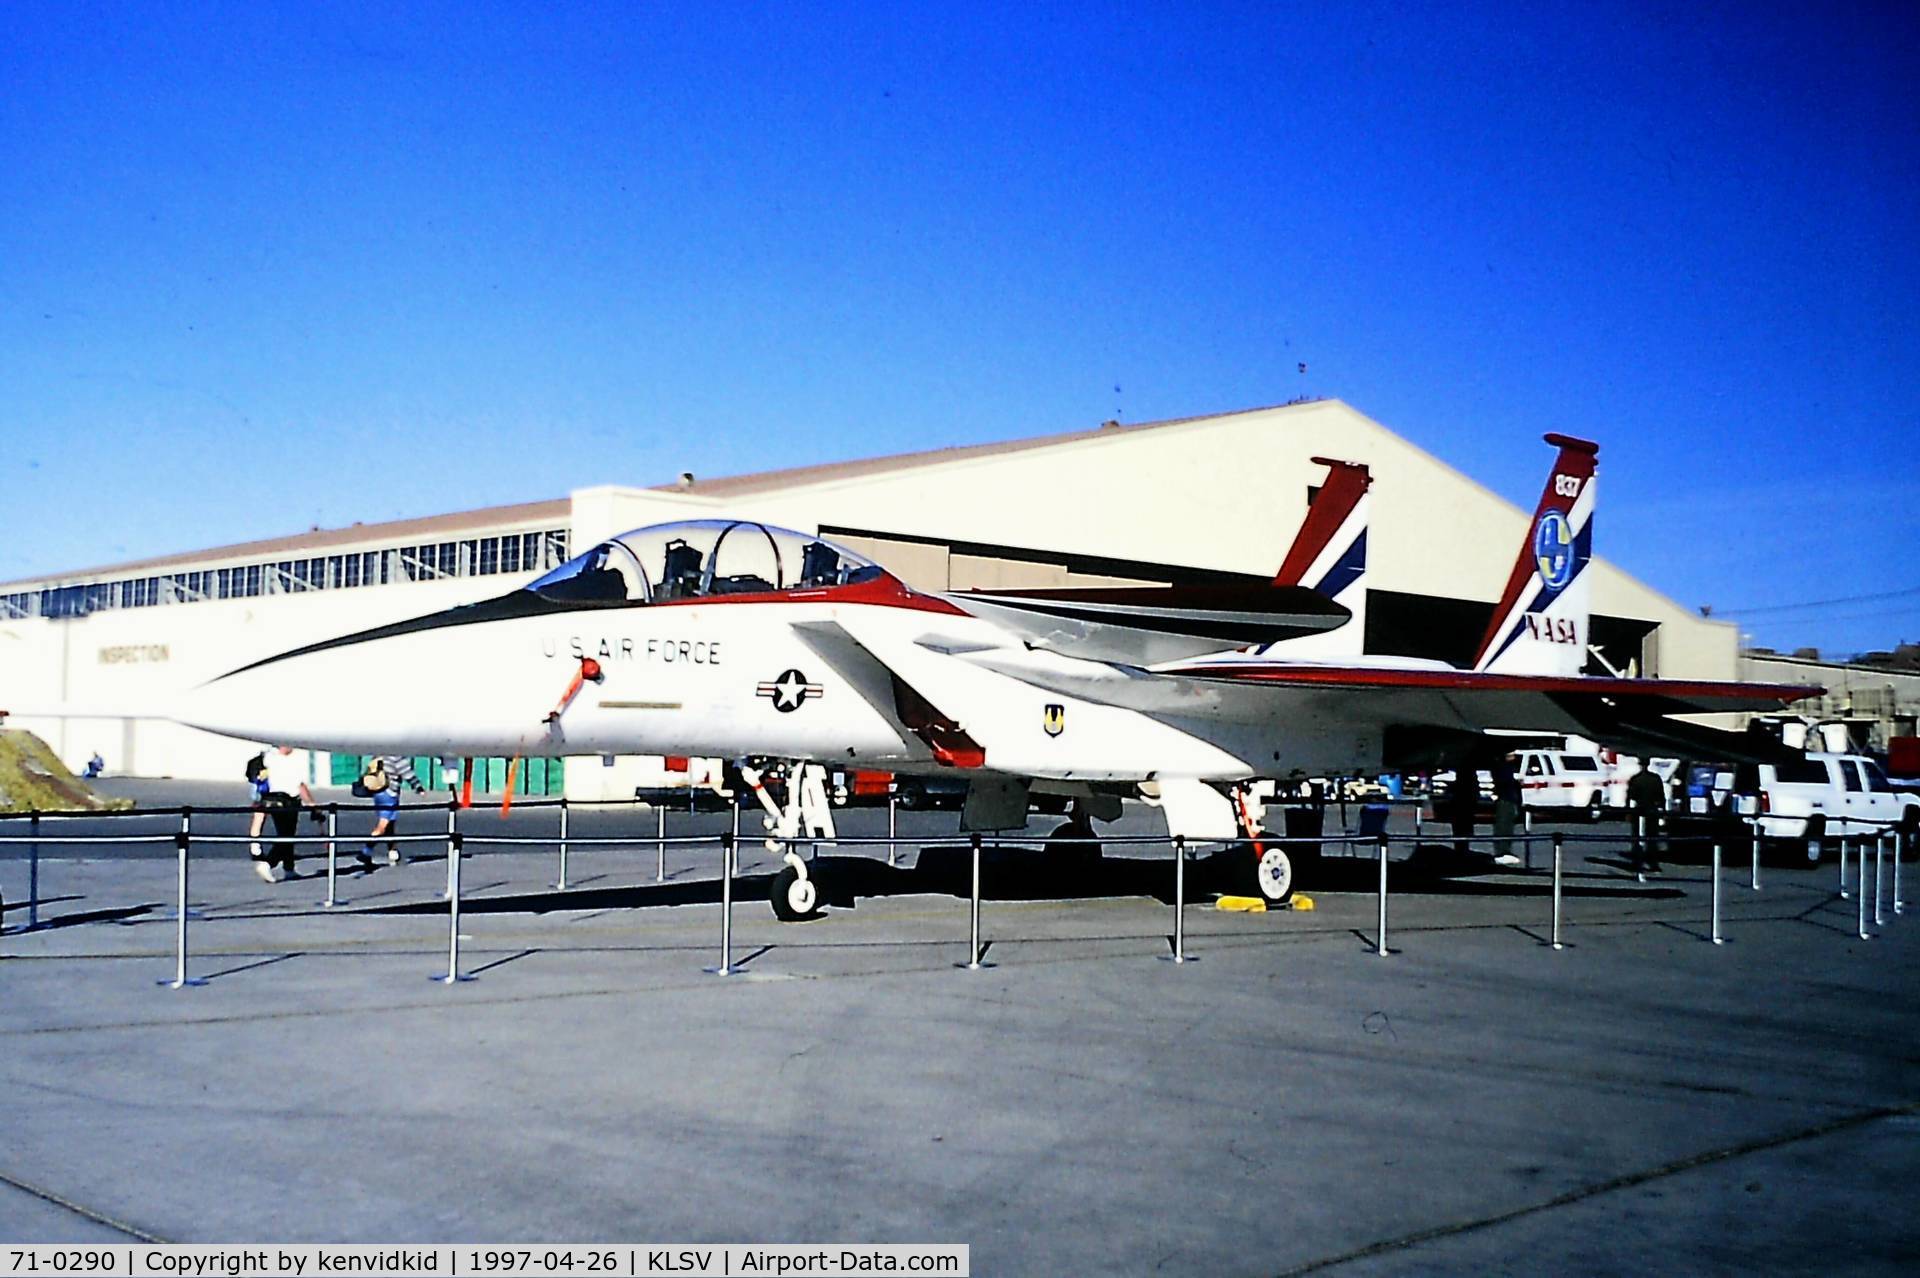 71-0290, 1971 McDonnell Douglas TF-15A Eagle C/N 8/B001, At the 1997 Golden Air Tattoo, Nellis.
ACTIVE F-15